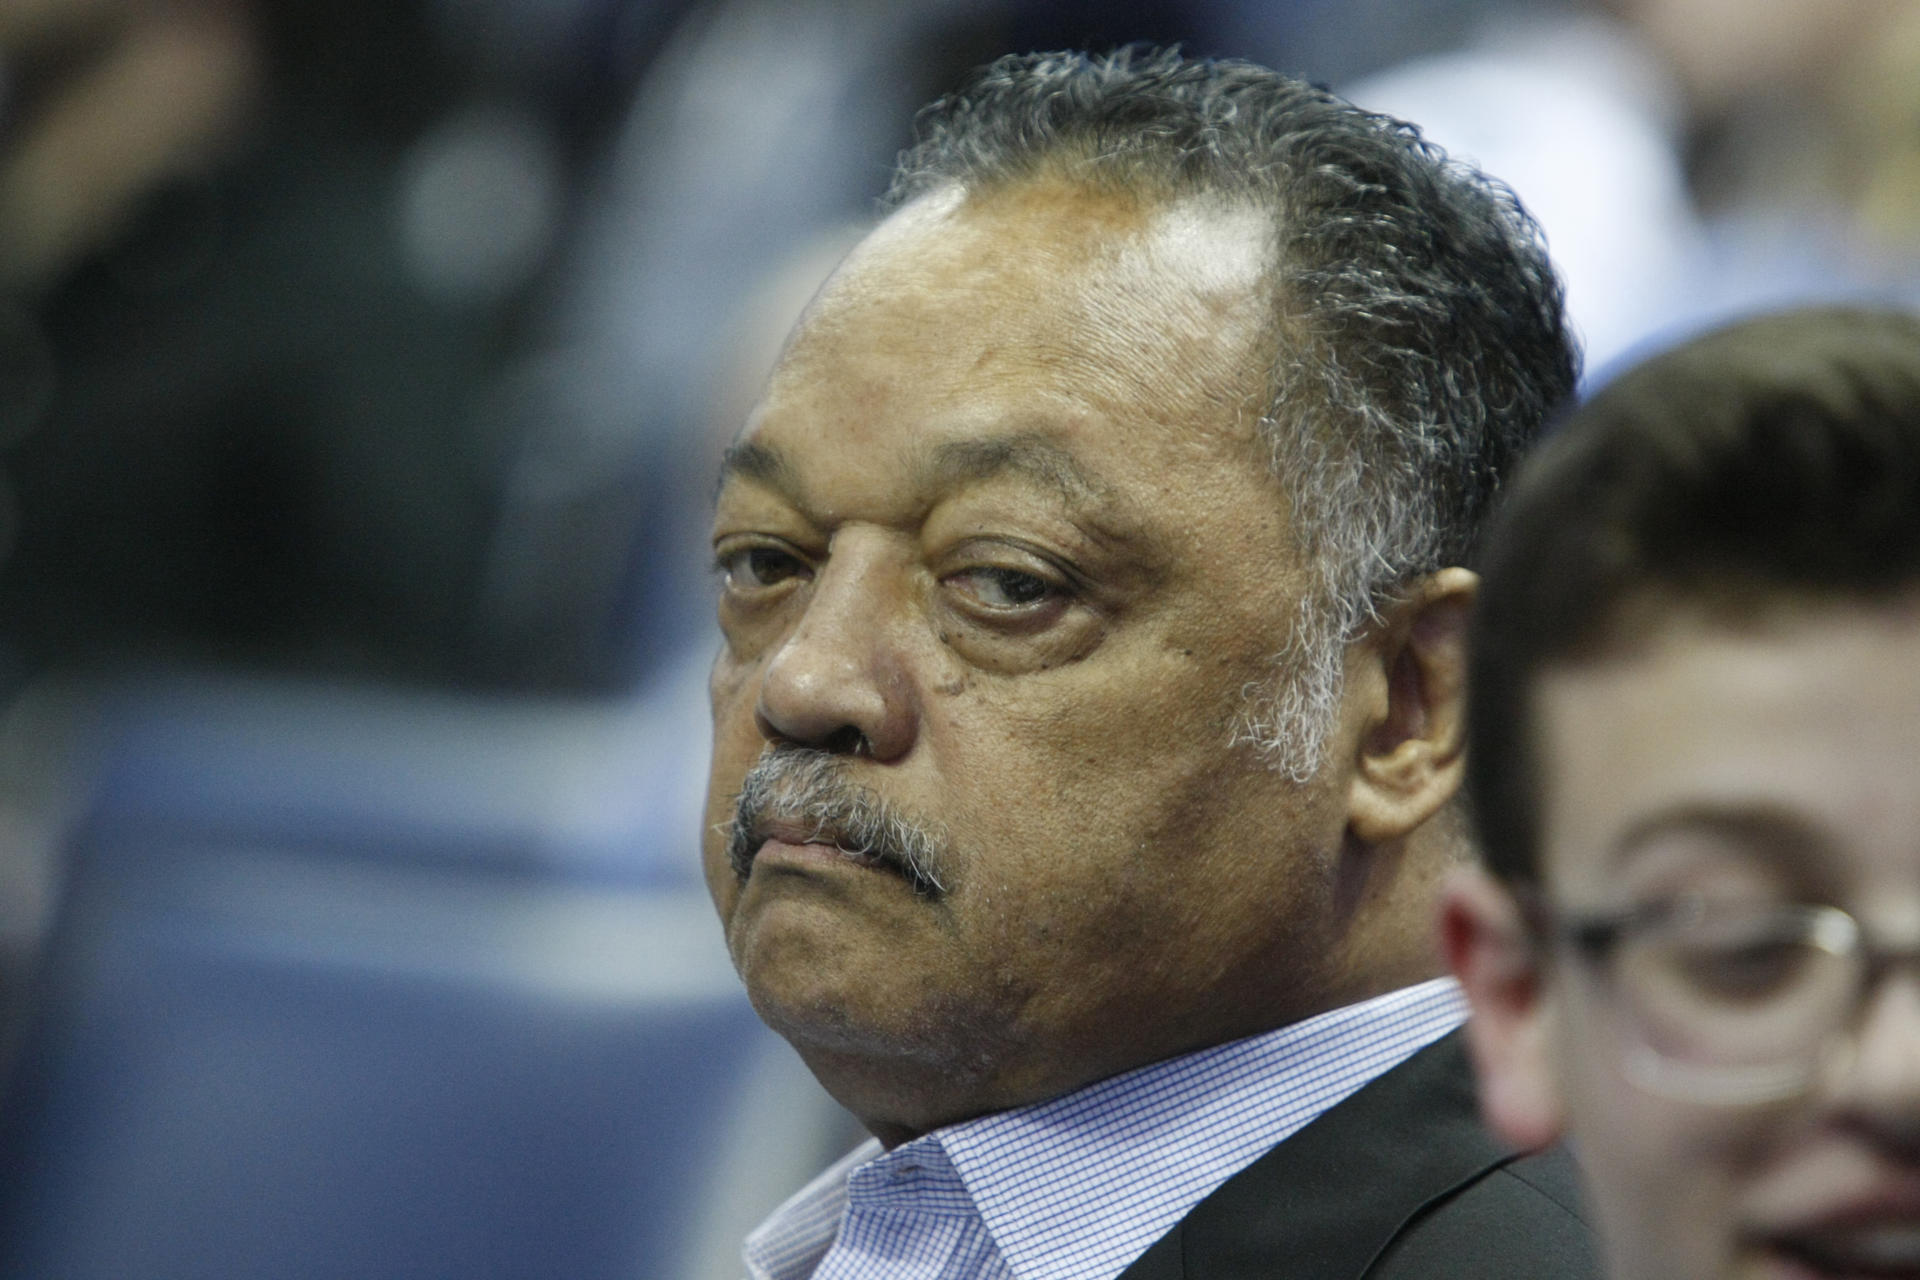 Civil rights activist and pastor Jesse Jackson at an NBA game between the Oklahoma City Thunder and Memphis Grizzlies, at the FedEx Forum in Memphis, Tennessee, US, on Feb. 14, 2018. EFE FILE/Karen Pulfer Foch